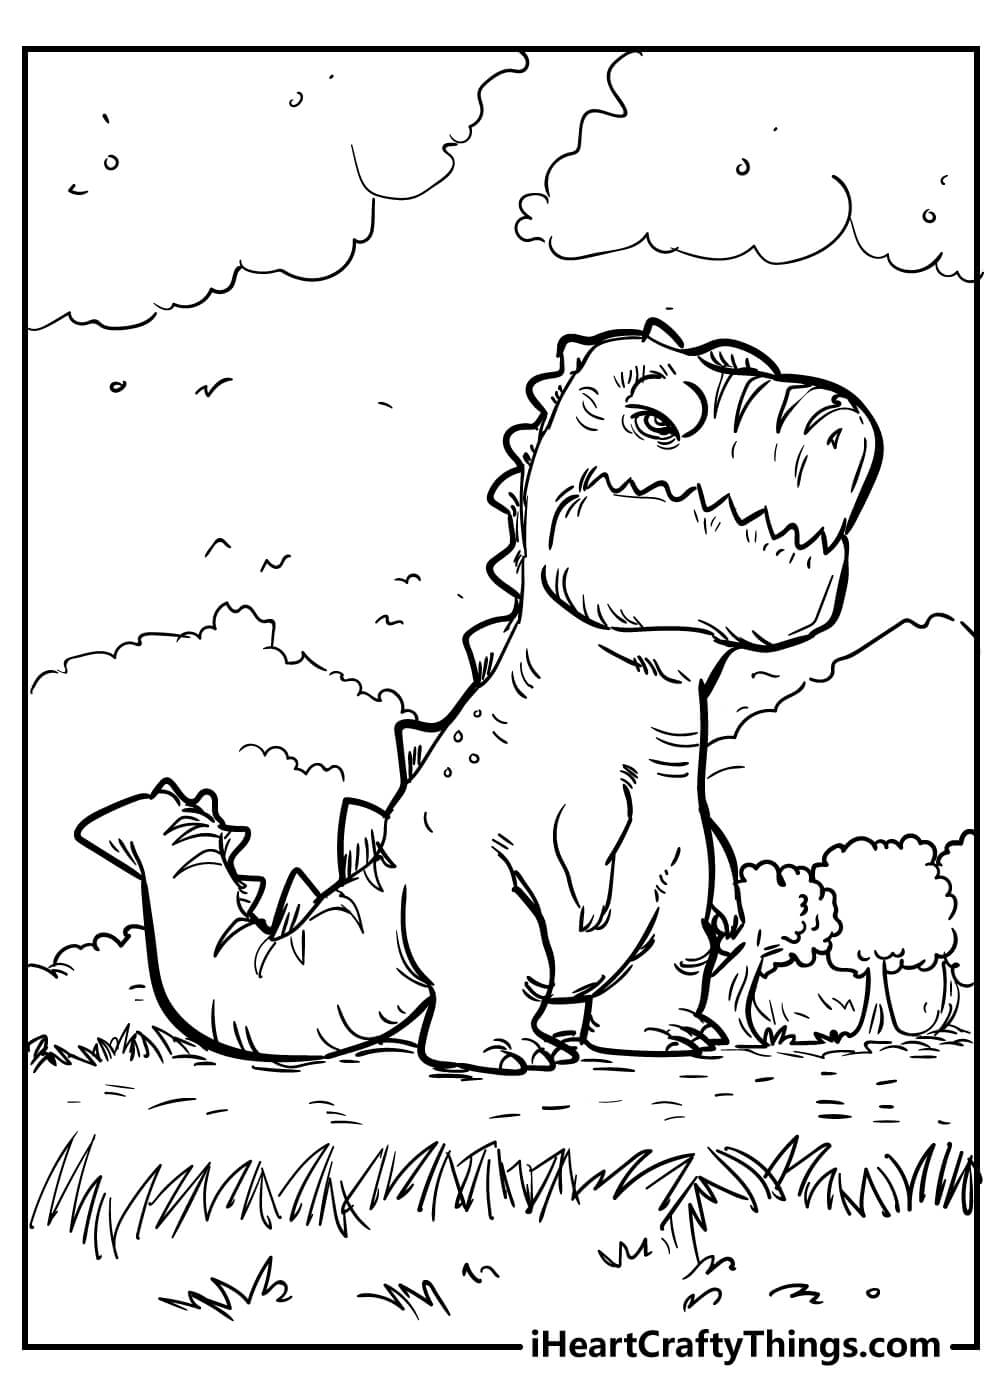 20 Tyrannosaurus Rex T Rex Coloring Pages for All Ages   Happier ...